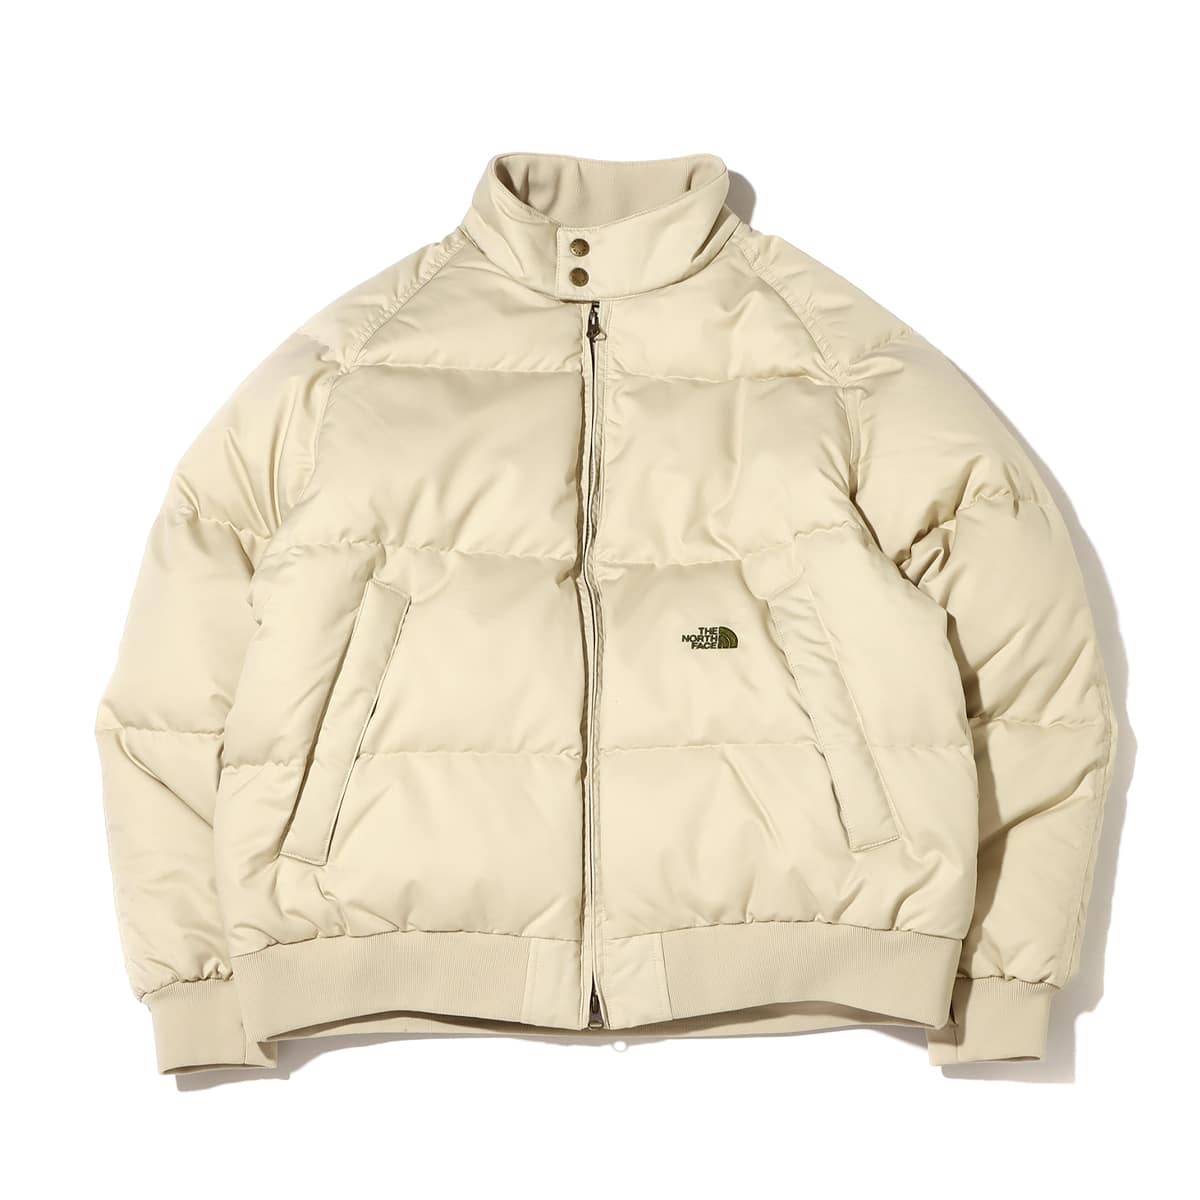 THE NORTH FACE light Down Jacket